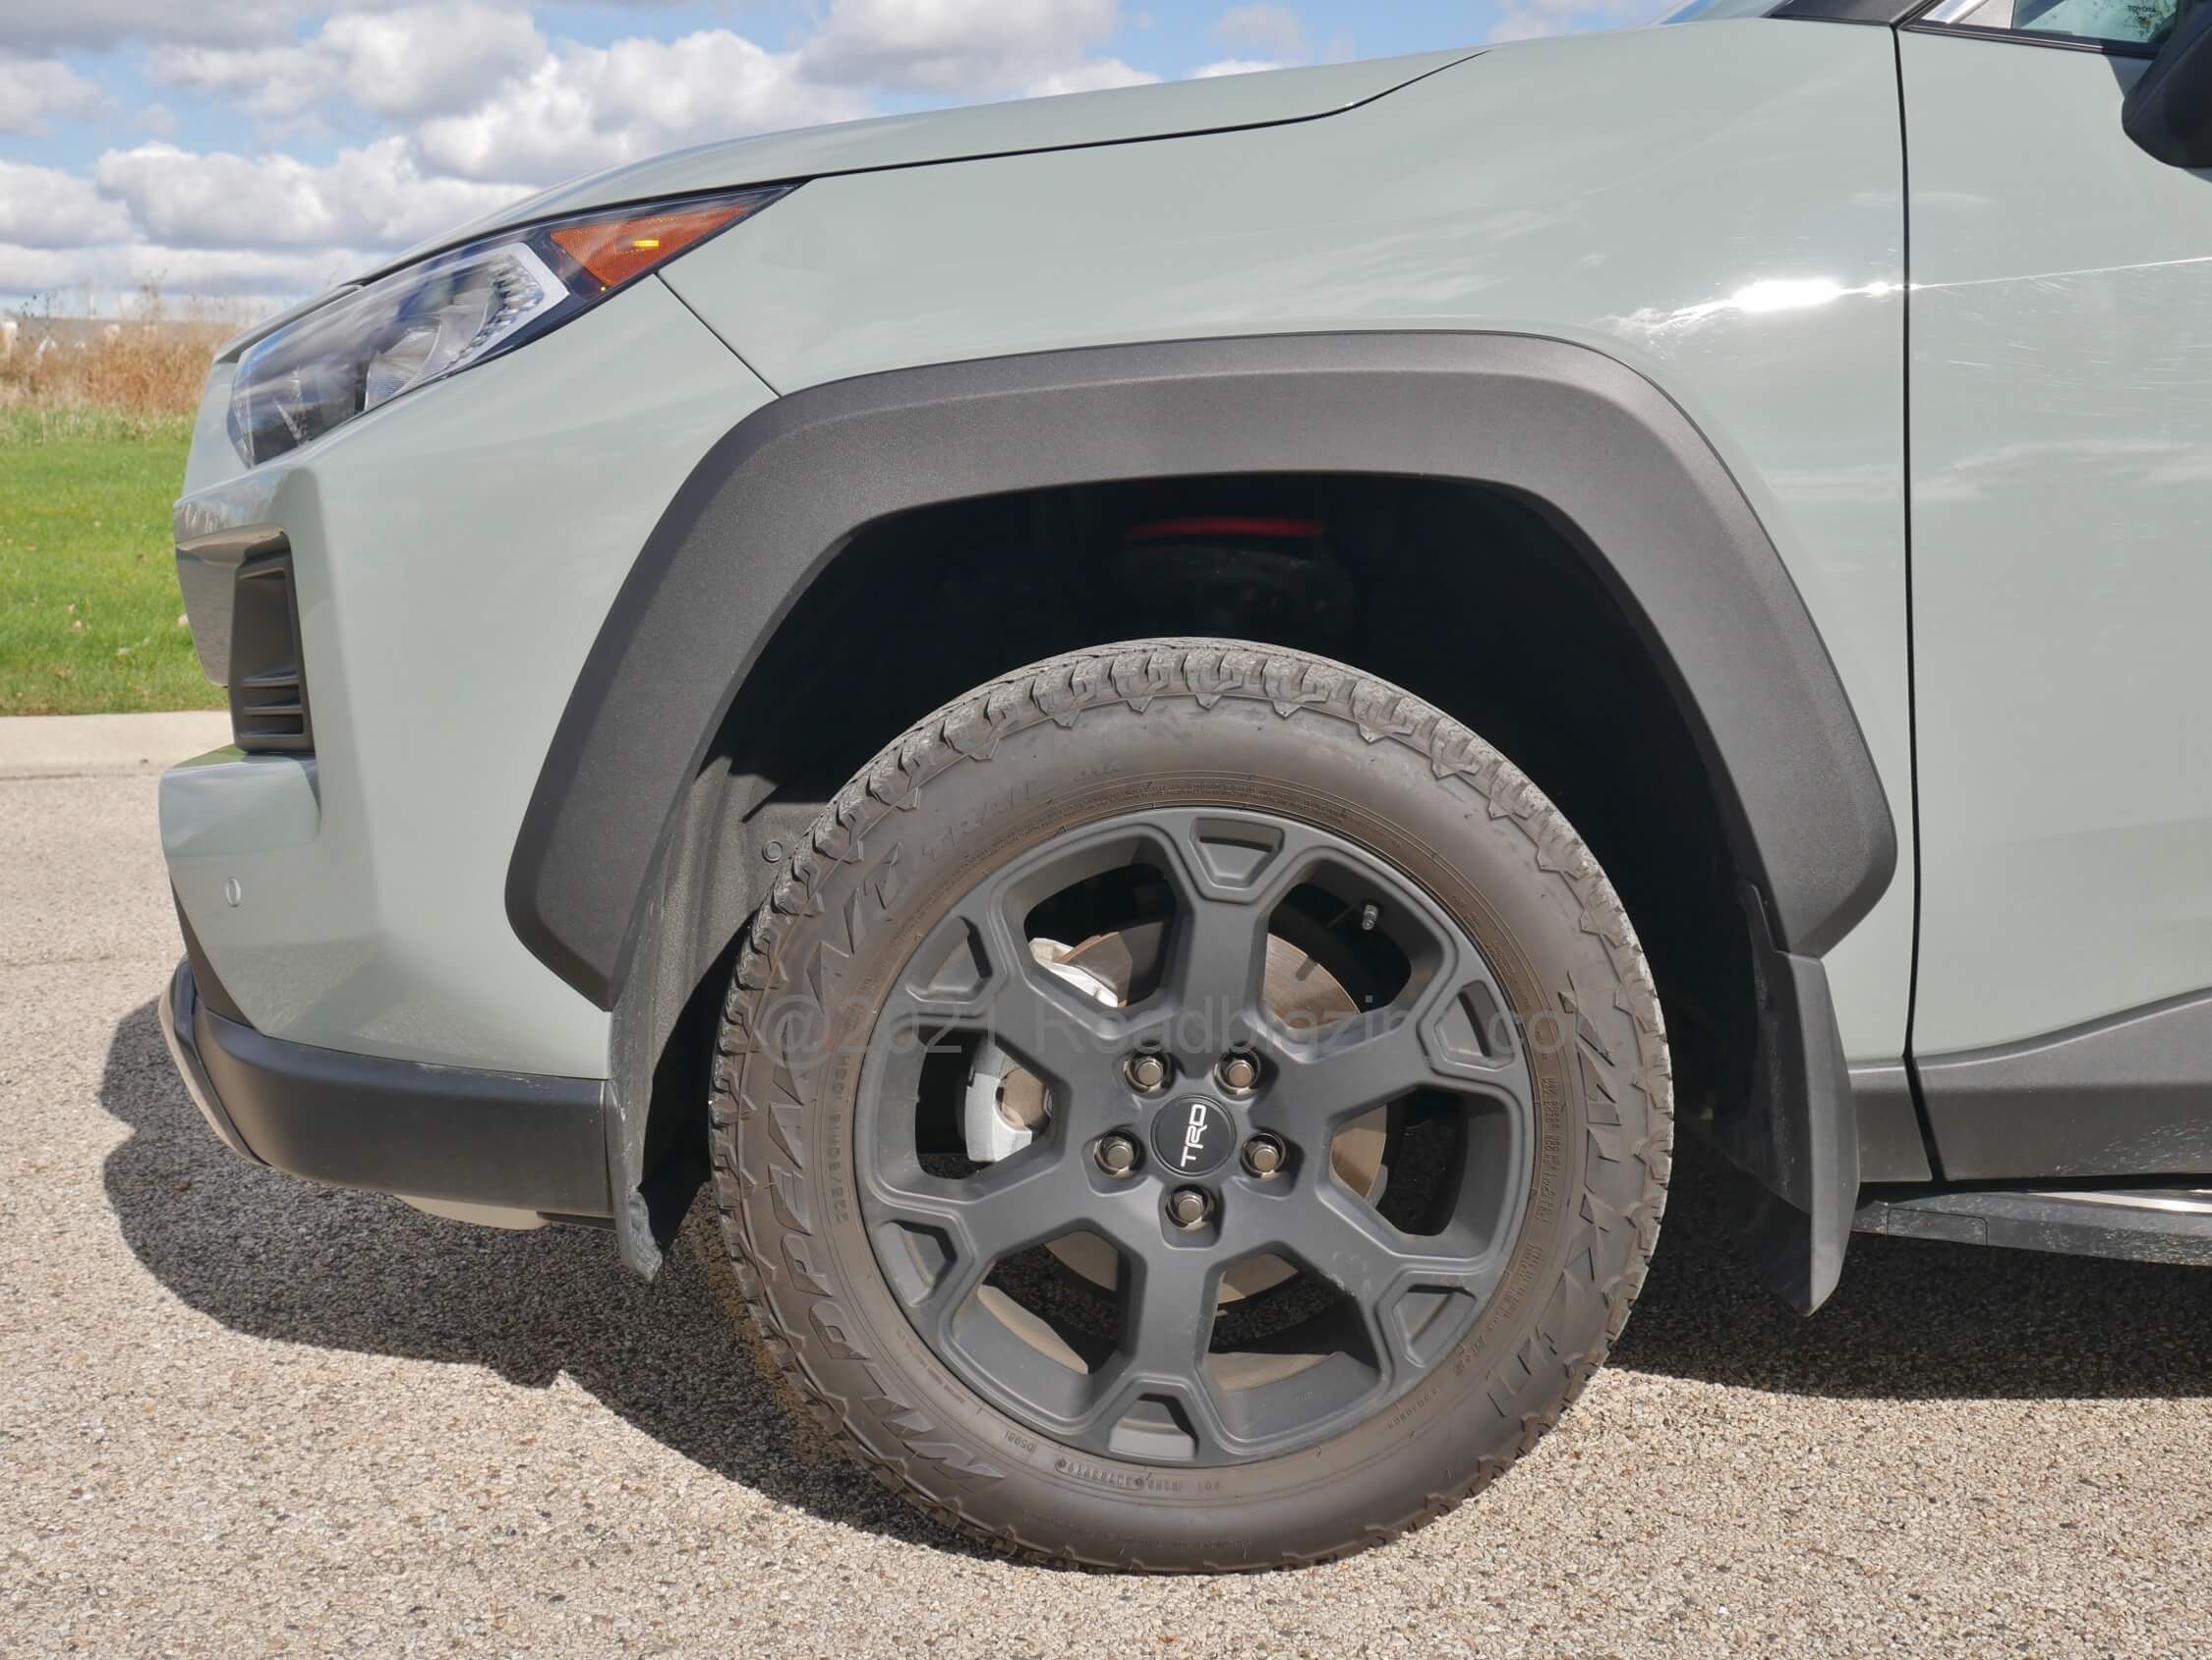 2021 Toyota RAV4 TRD Off Road: independent suspension rides on knobby tread all-terrain tires